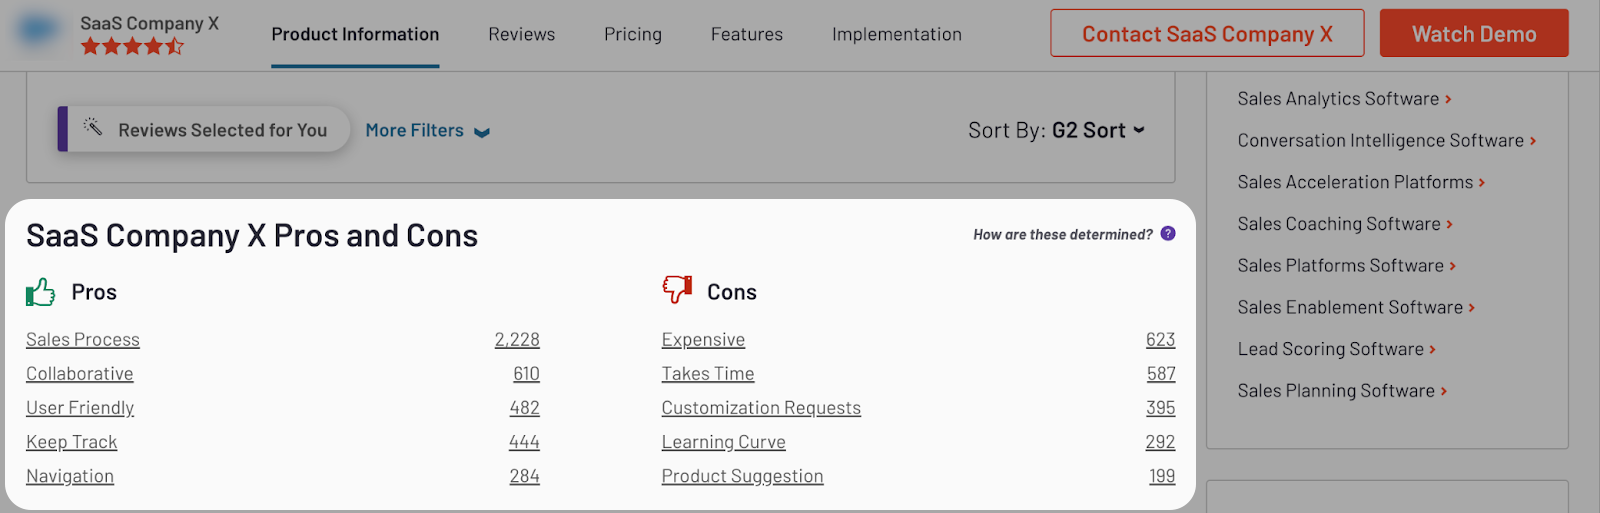 5 pros and 5 cons shown on profile page with corresponding number of reviews